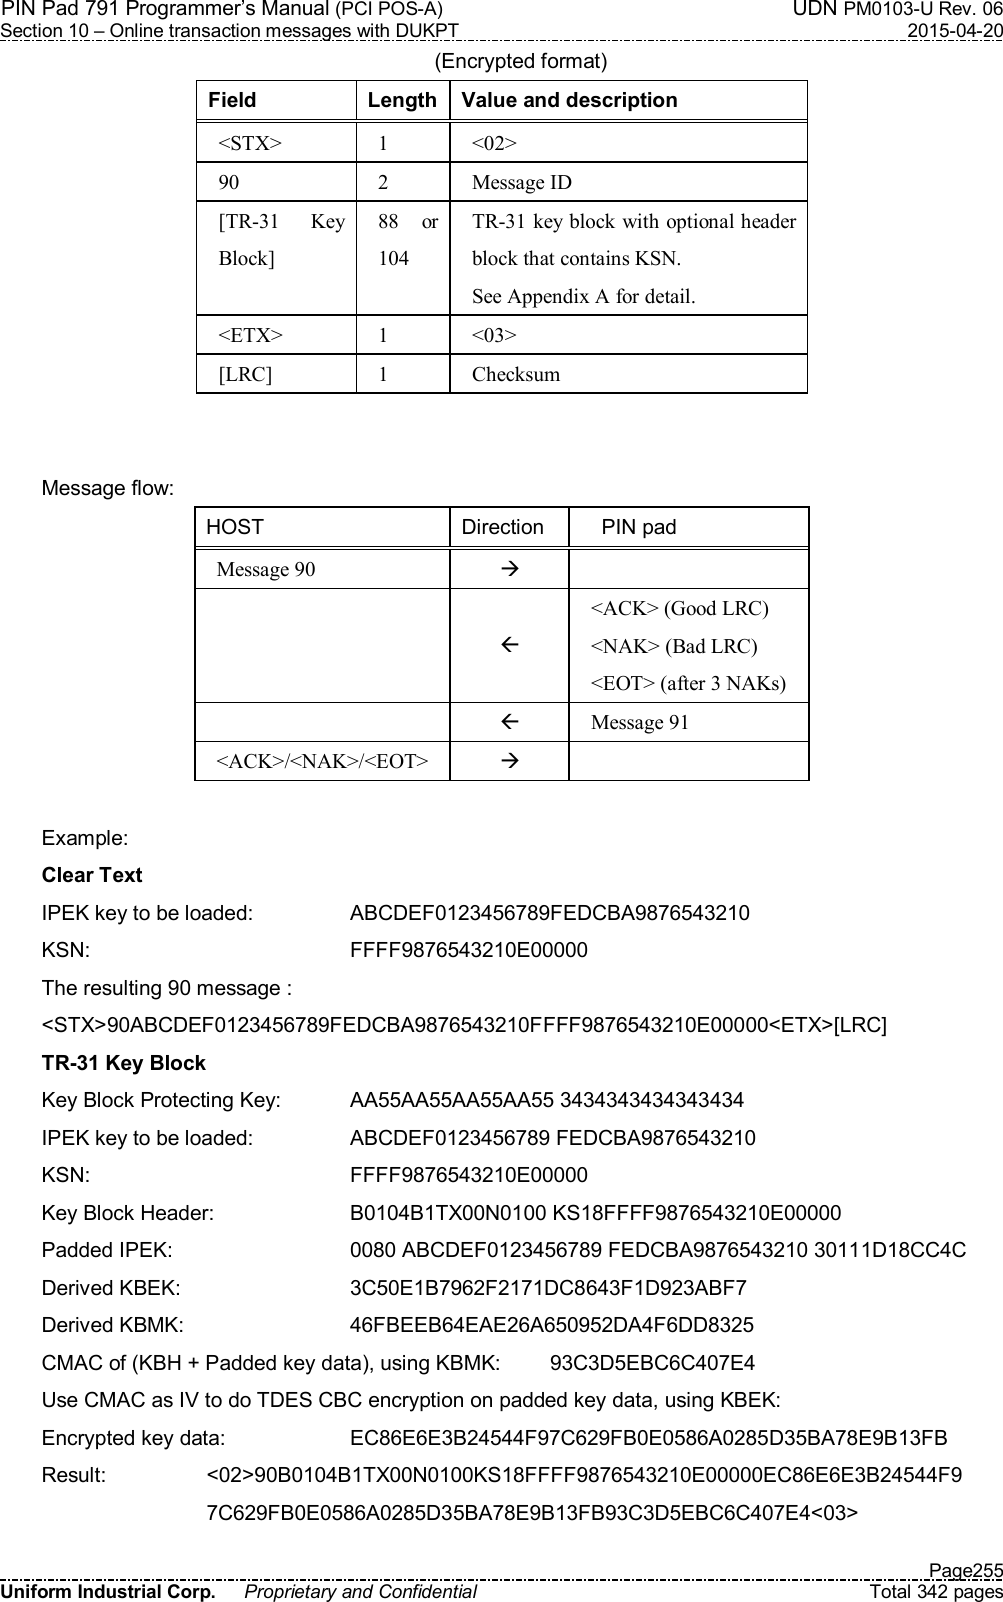 PIN Pad 791 Programmer’s Manual (PCI POS-A)  UDN PM0103-U Rev. 06 Section 10 – Online transaction messages with DUKPT  2015-04-20   Page255 Uniform Industrial Corp.  Proprietary and Confidential  Total 342 pages (Encrypted format) Field  Length Value and description &lt;STX&gt;  1  &lt;02&gt; 90  2  Message ID [TR-31  Key Block] 88  or 104 TR-31 key block with optional header block that contains KSN. See Appendix A for detail. &lt;ETX&gt;  1  &lt;03&gt; [LRC]  1  Checksum   Message flow: HOST  Direction      PIN pad Message 90      &lt;ACK&gt; (Good LRC) &lt;NAK&gt; (Bad LRC) &lt;EOT&gt; (after 3 NAKs)   Message 91 &lt;ACK&gt;/&lt;NAK&gt;/&lt;EOT&gt;     Example:   Clear Text IPEK key to be loaded:    ABCDEF0123456789FEDCBA9876543210 KSN:        FFFF9876543210E00000 The resulting 90 message :  &lt;STX&gt;90ABCDEF0123456789FEDCBA9876543210FFFF9876543210E00000&lt;ETX&gt;[LRC] TR-31 Key Block Key Block Protecting Key:    AA55AA55AA55AA55 3434343434343434 IPEK key to be loaded:    ABCDEF0123456789 FEDCBA9876543210 KSN:        FFFF9876543210E00000 Key Block Header:      B0104B1TX00N0100 KS18FFFF9876543210E00000 Padded IPEK:        0080 ABCDEF0123456789 FEDCBA9876543210 30111D18CC4C Derived KBEK:        3C50E1B7962F2171DC8643F1D923ABF7 Derived KBMK:        46FBEEB64EAE26A650952DA4F6DD8325 CMAC of (KBH + Padded key data), using KBMK:  93C3D5EBC6C407E4 Use CMAC as IV to do TDES CBC encryption on padded key data, using KBEK: Encrypted key data:      EC86E6E3B24544F97C629FB0E0586A0285D35BA78E9B13FB Result:  &lt;02&gt;90B0104B1TX00N0100KS18FFFF9876543210E00000EC86E6E3B24544F9 7C629FB0E0586A0285D35BA78E9B13FB93C3D5EBC6C407E4&lt;03&gt; 